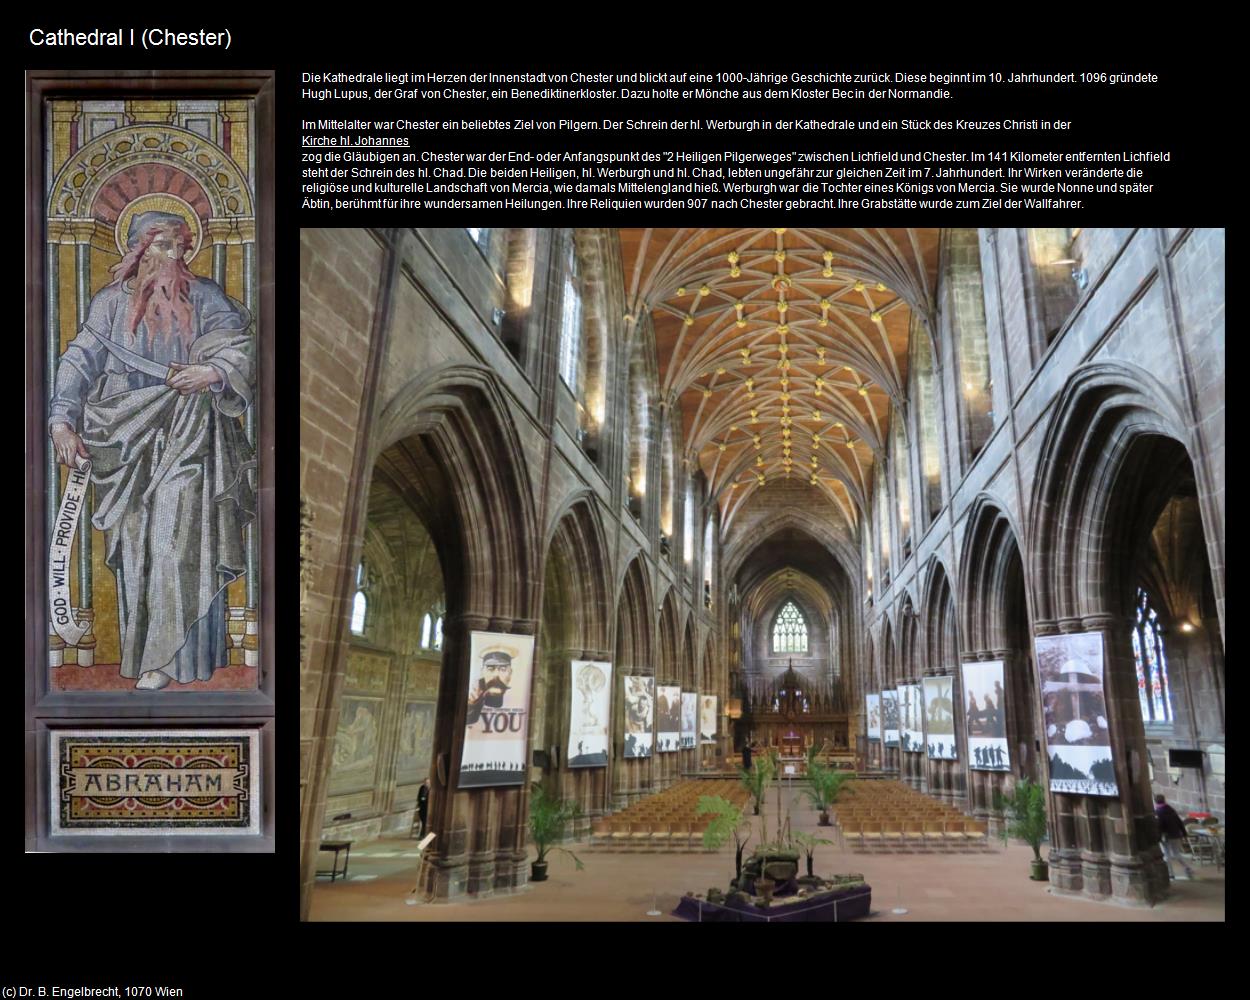 Cathedral I  (Chester, England) in Kulturatlas-ENGLAND und WALES(c)B.Engelbrecht